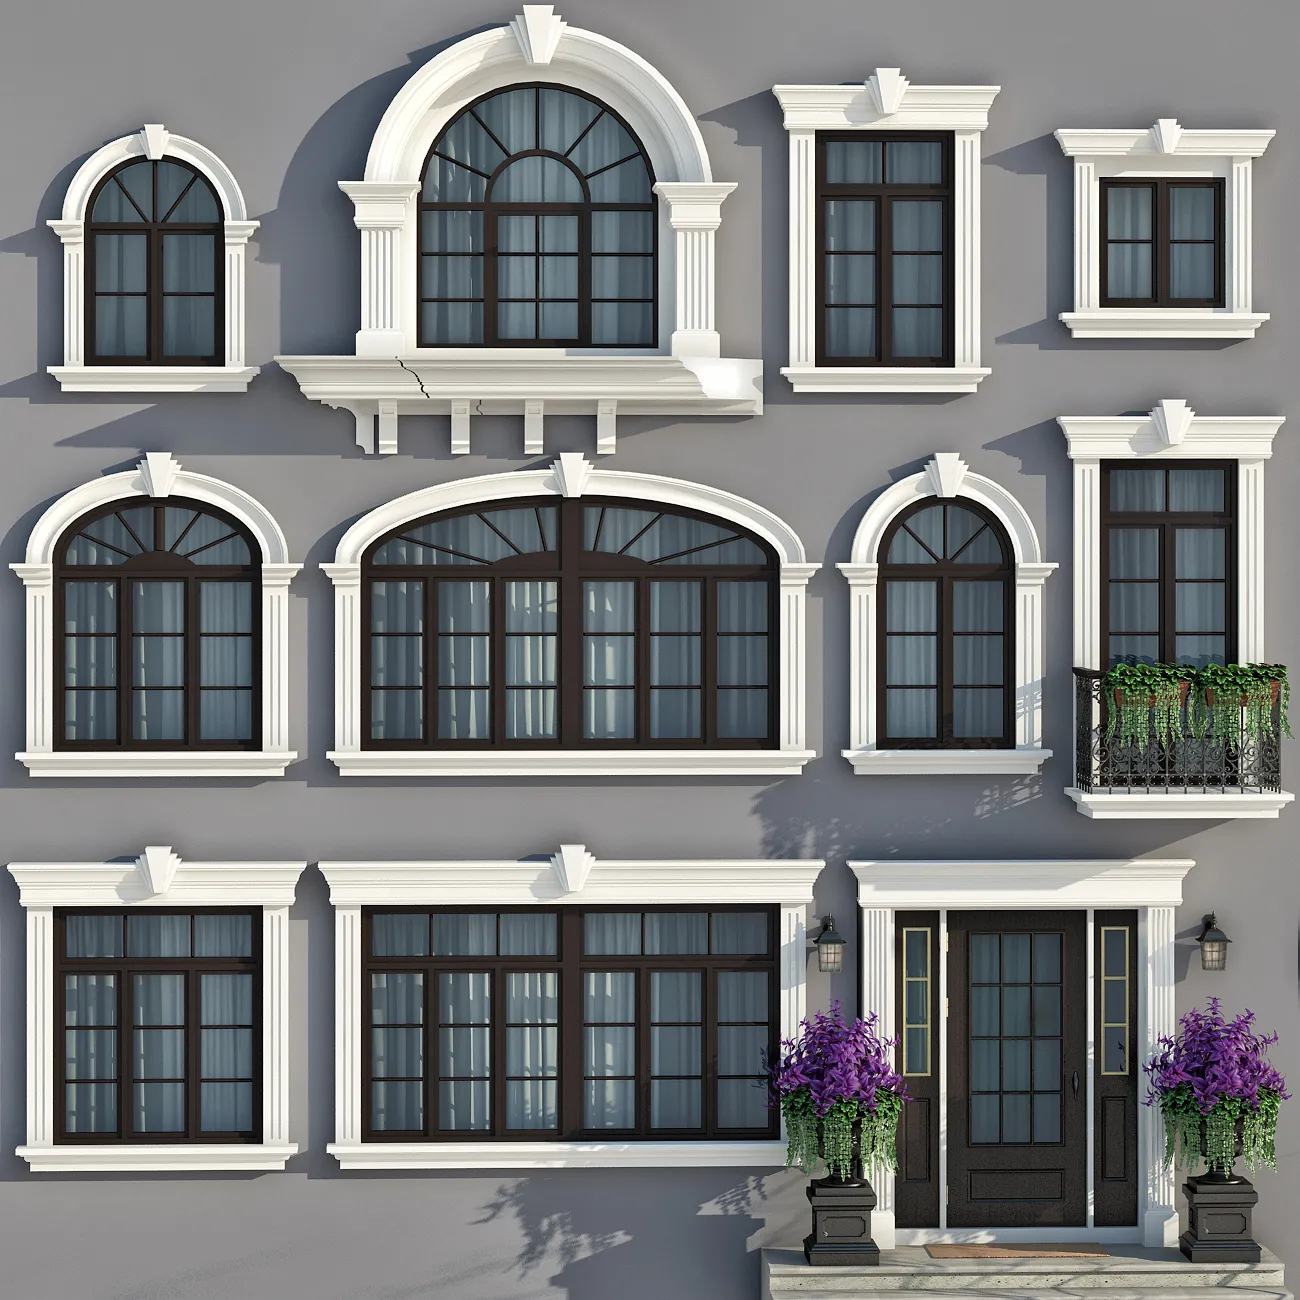 Windows and doors in the style of modern classics v2 (Vray) – 4932